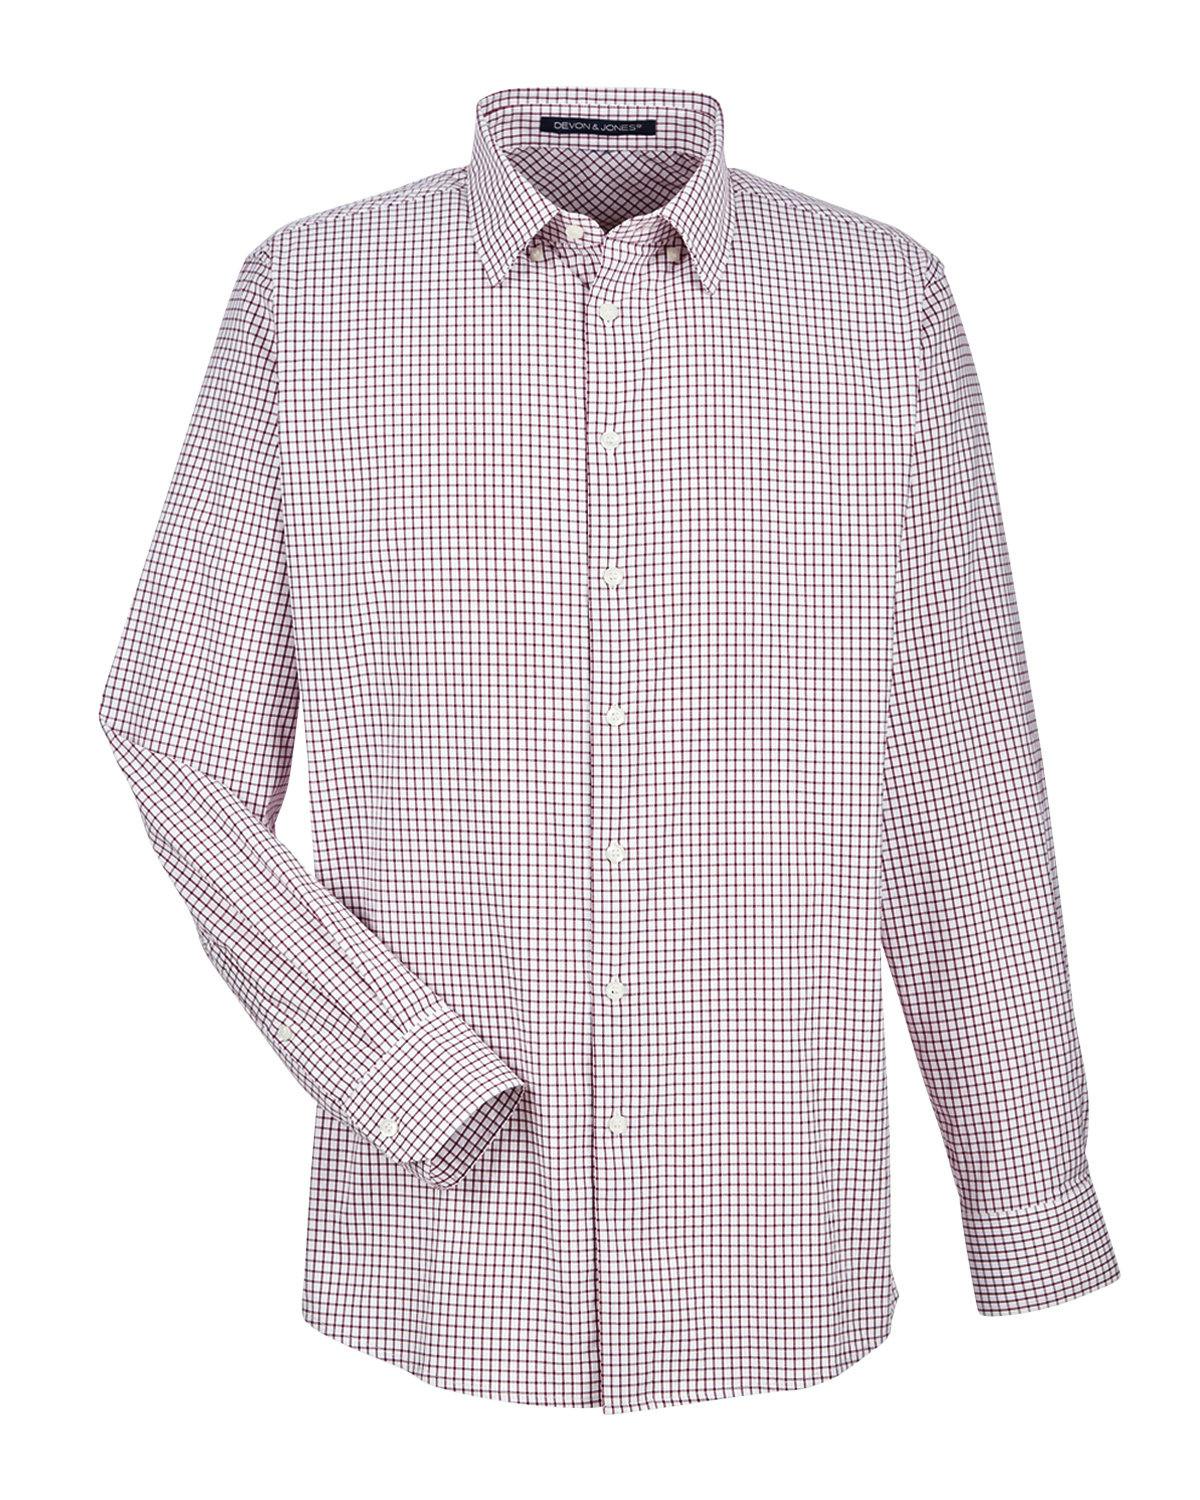 Image for CrownLux Performance® Men's Micro Windowpane Woven Shirt